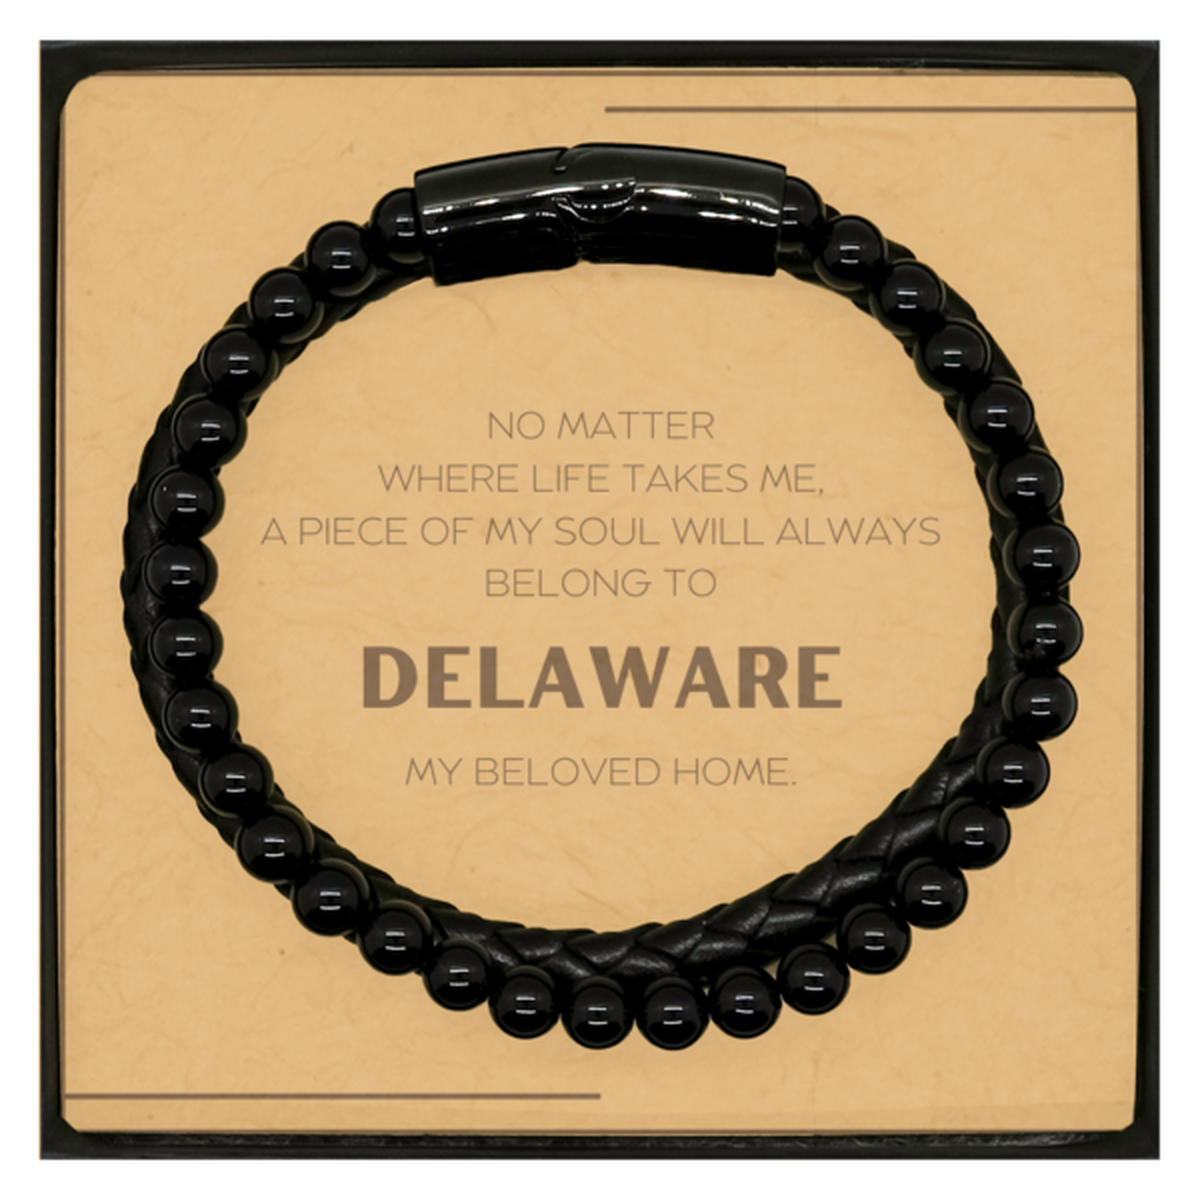 Love Delaware State Gifts, My soul will always belong to Delaware, Proud Stone Leather Bracelets, Birthday Christmas Unique Gifts For Delaware Men, Women, Friends